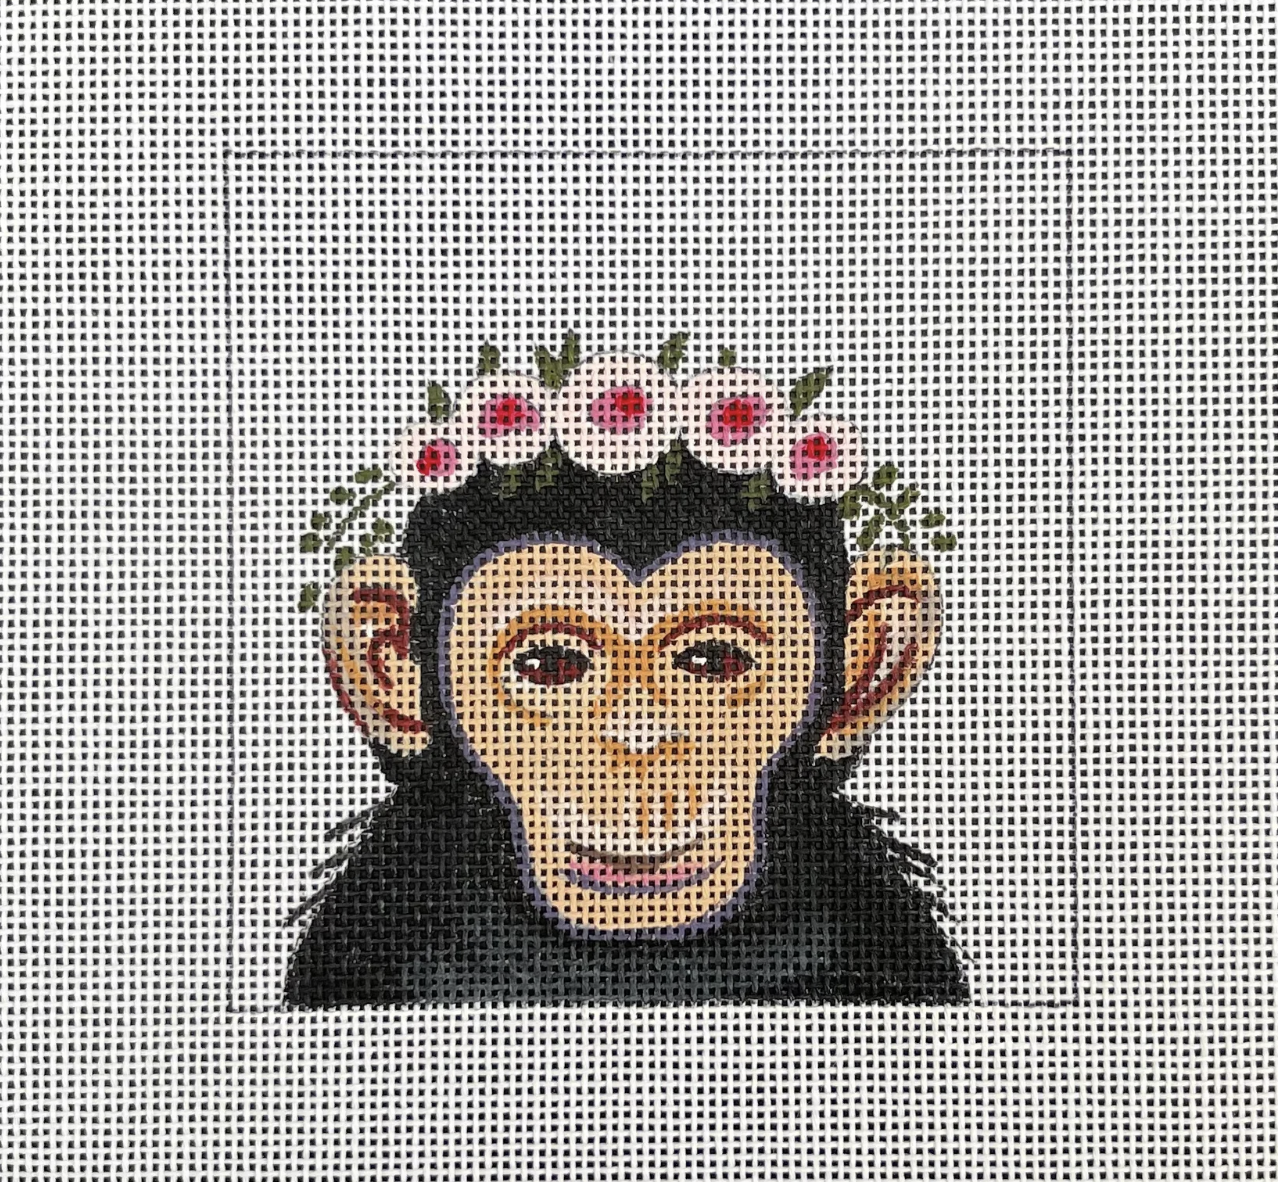 Monkey with Flower Crown